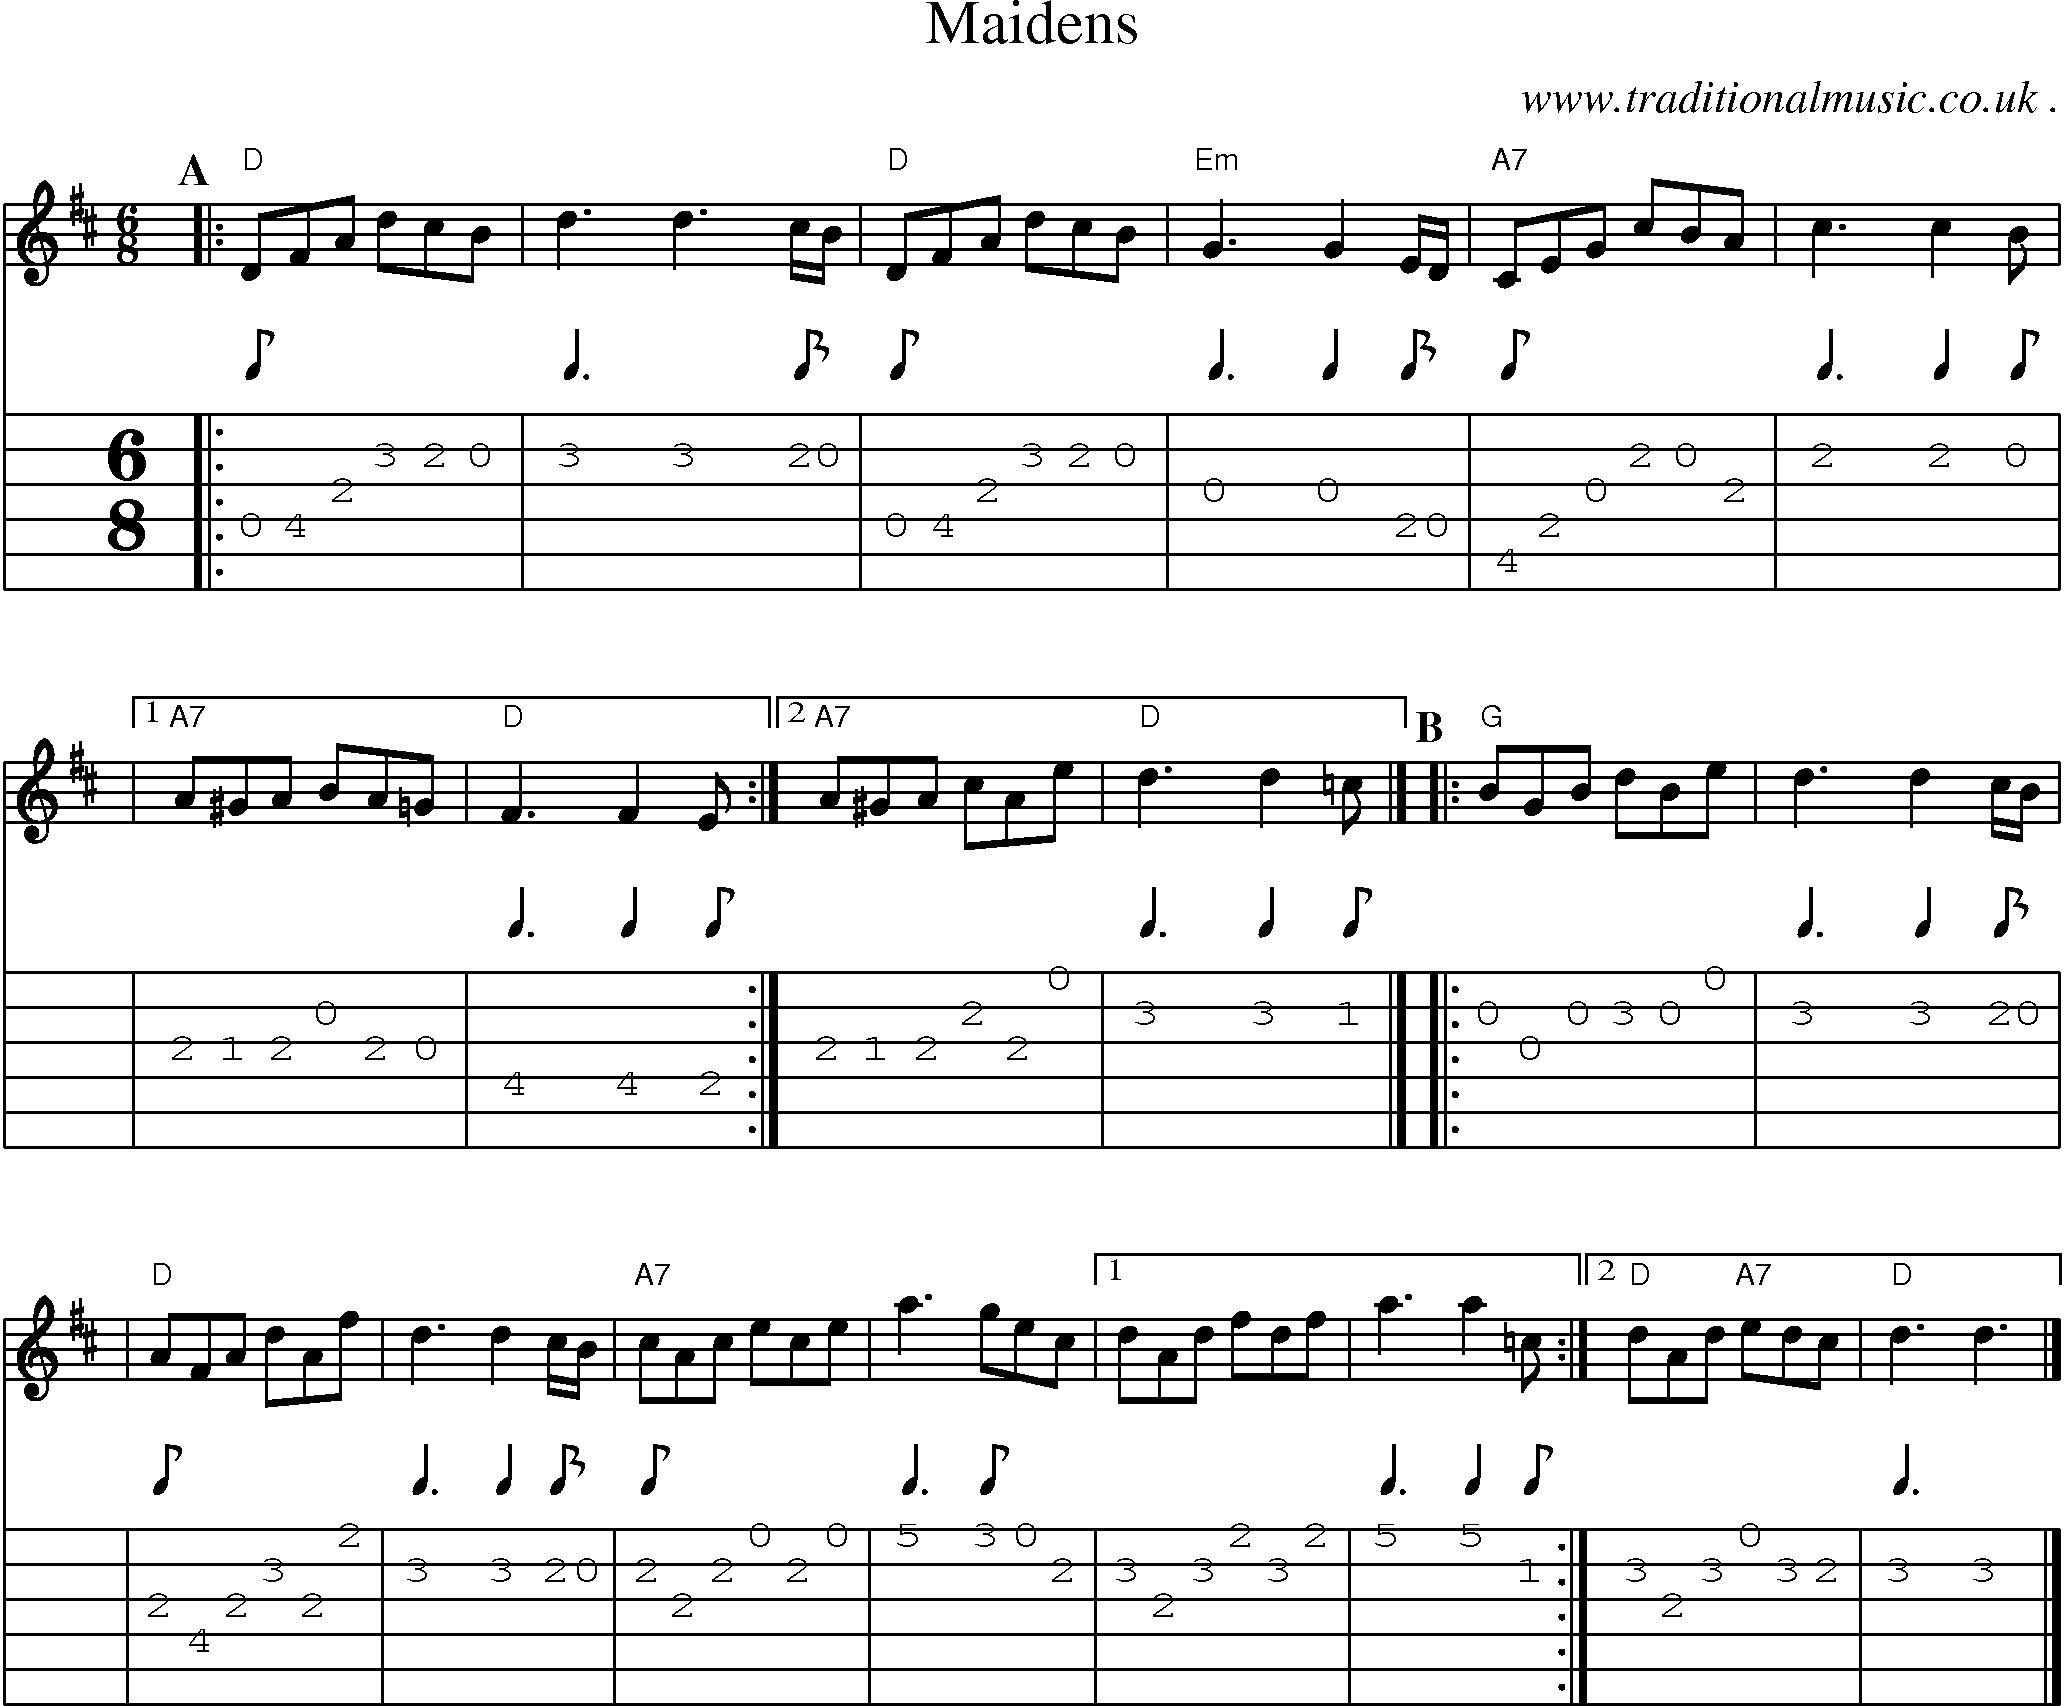 Sheet-music  score, Chords and Guitar Tabs for Maidens